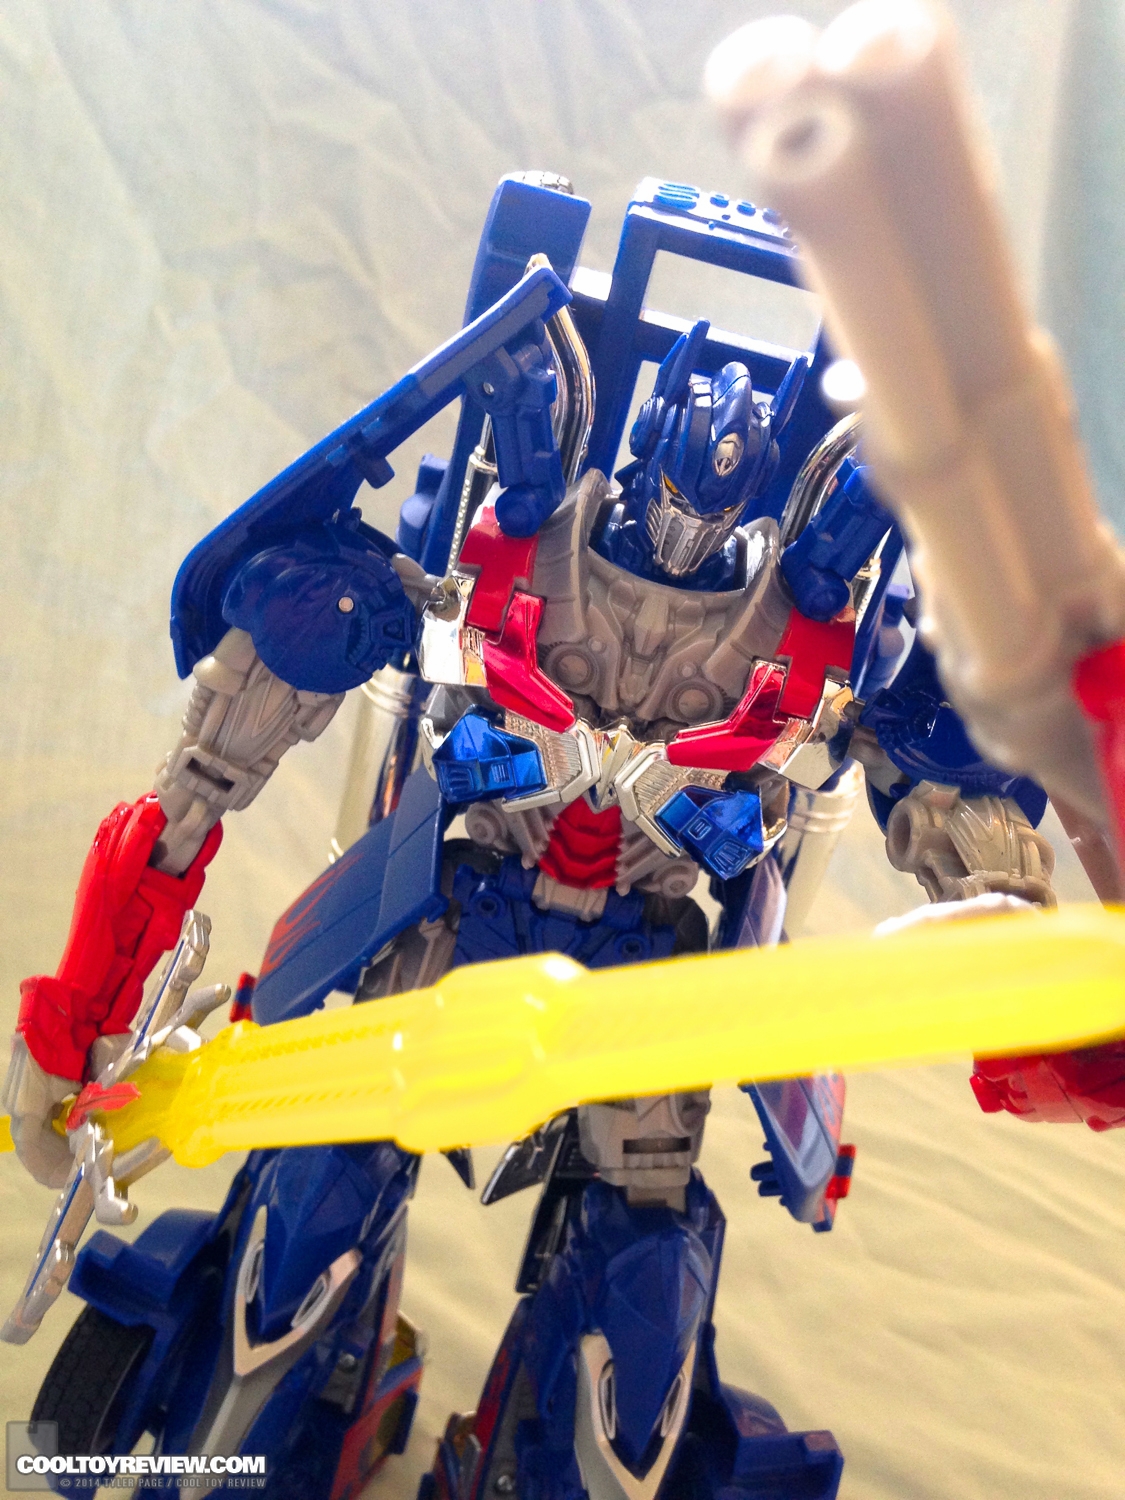 Transformers-Age-of-Extinction-Hasbro-Action-Figures-Review-020.jpg